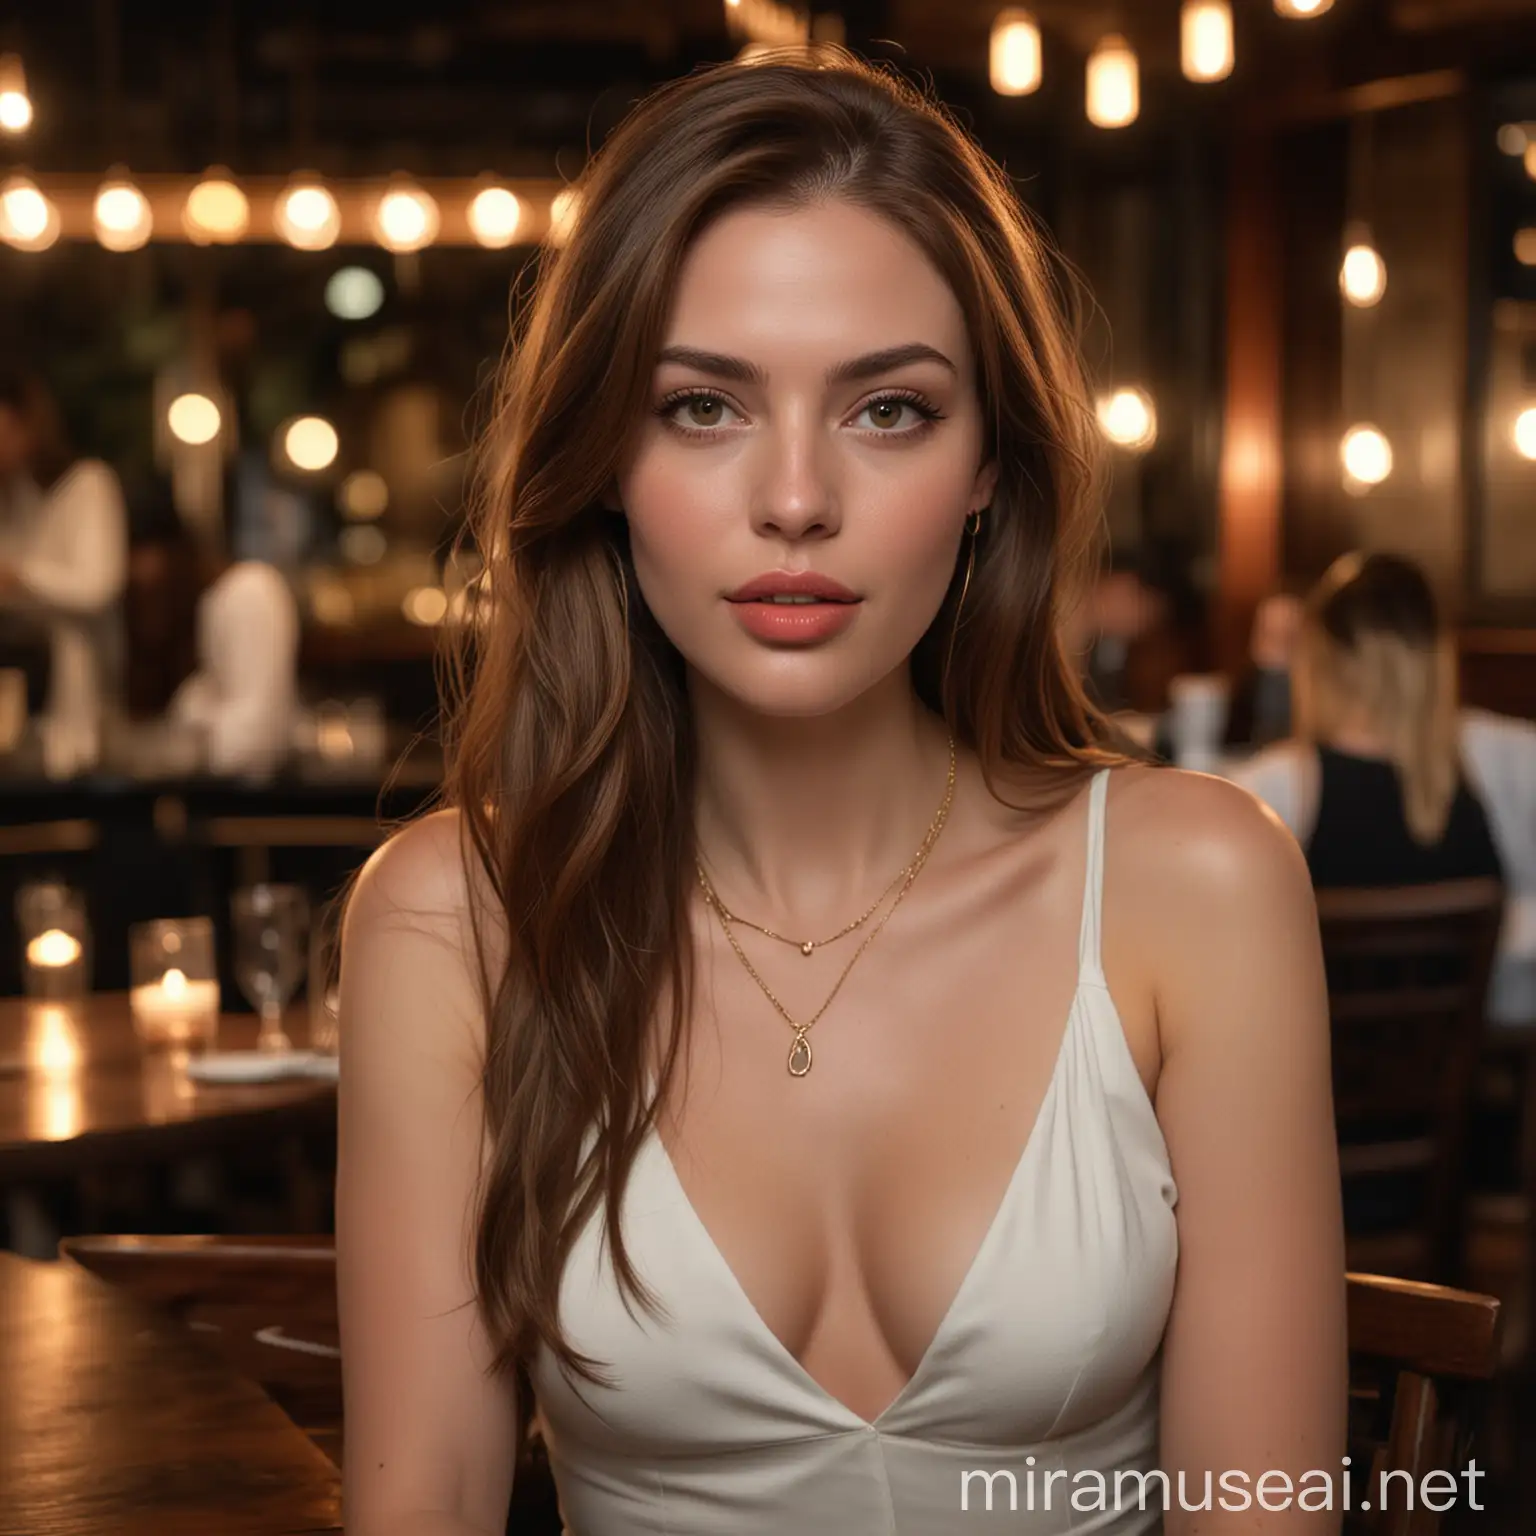 30 year old pale elegant white woman with long brown hair parted right, peach lipstick, gold necklace, nude, sitting at table, dark crowded intimate restaurant background at night